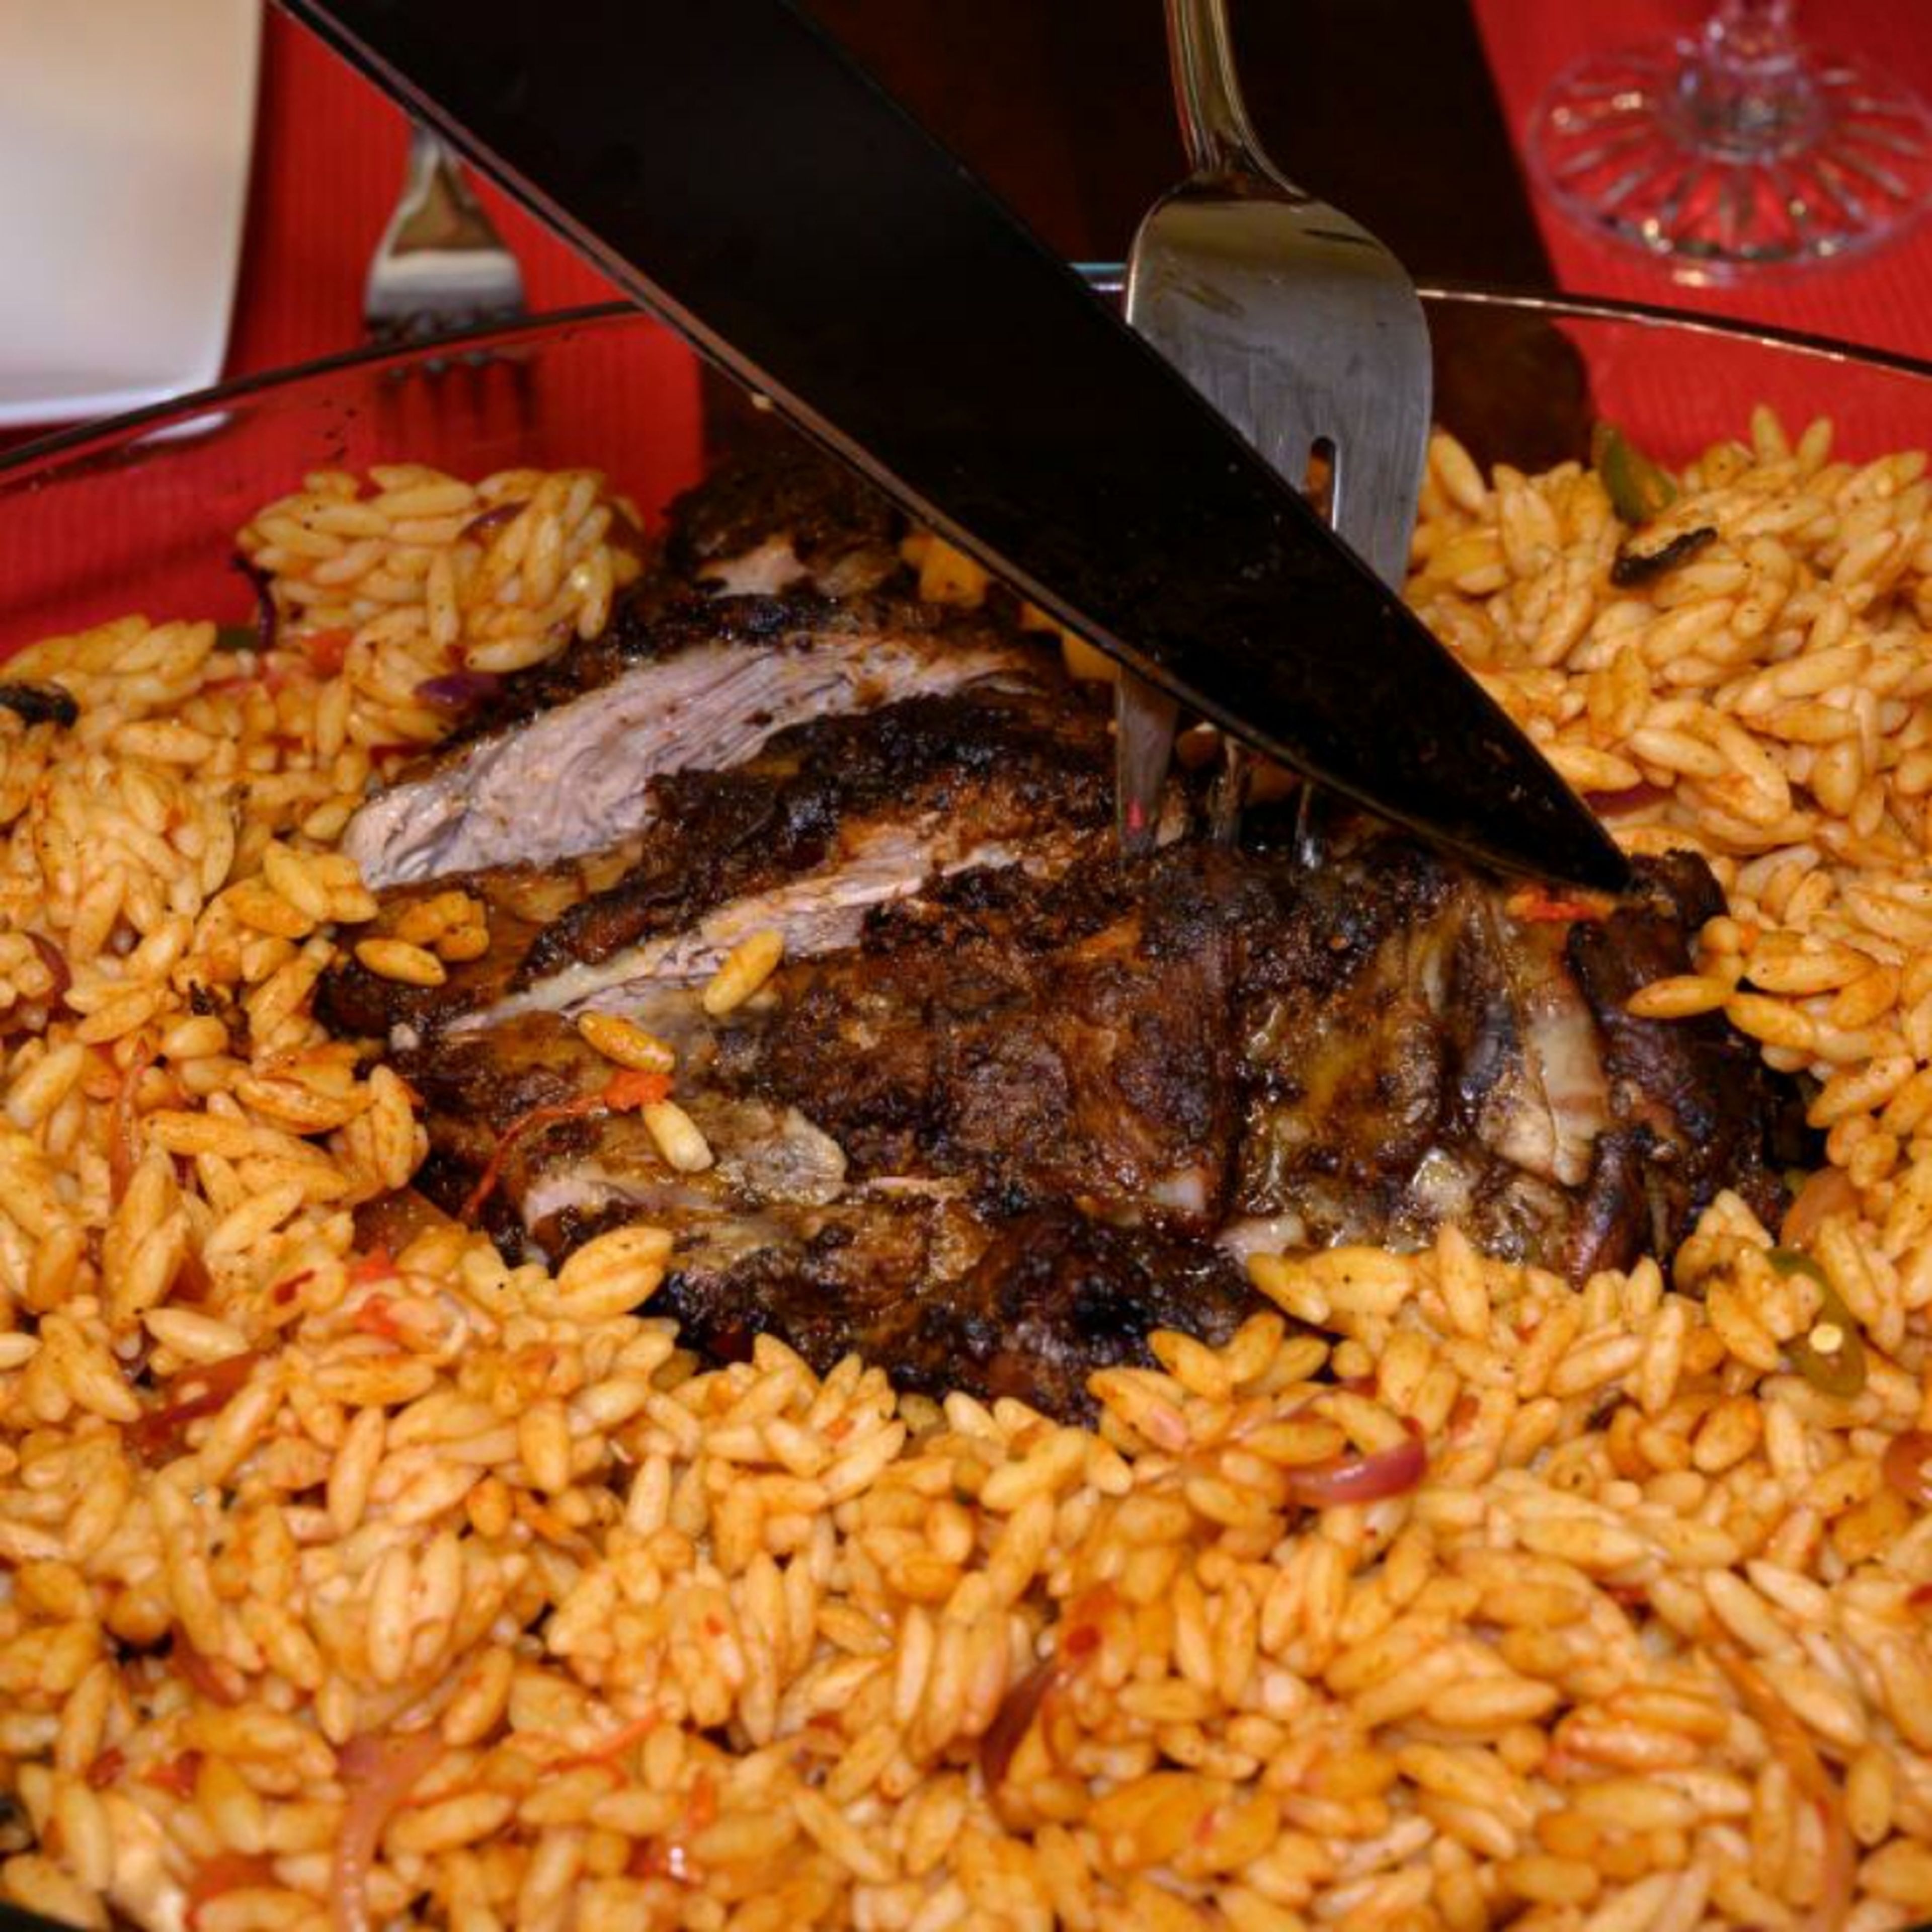 Evenly slice the lamb shoulder and serve with the Orzo pasta.